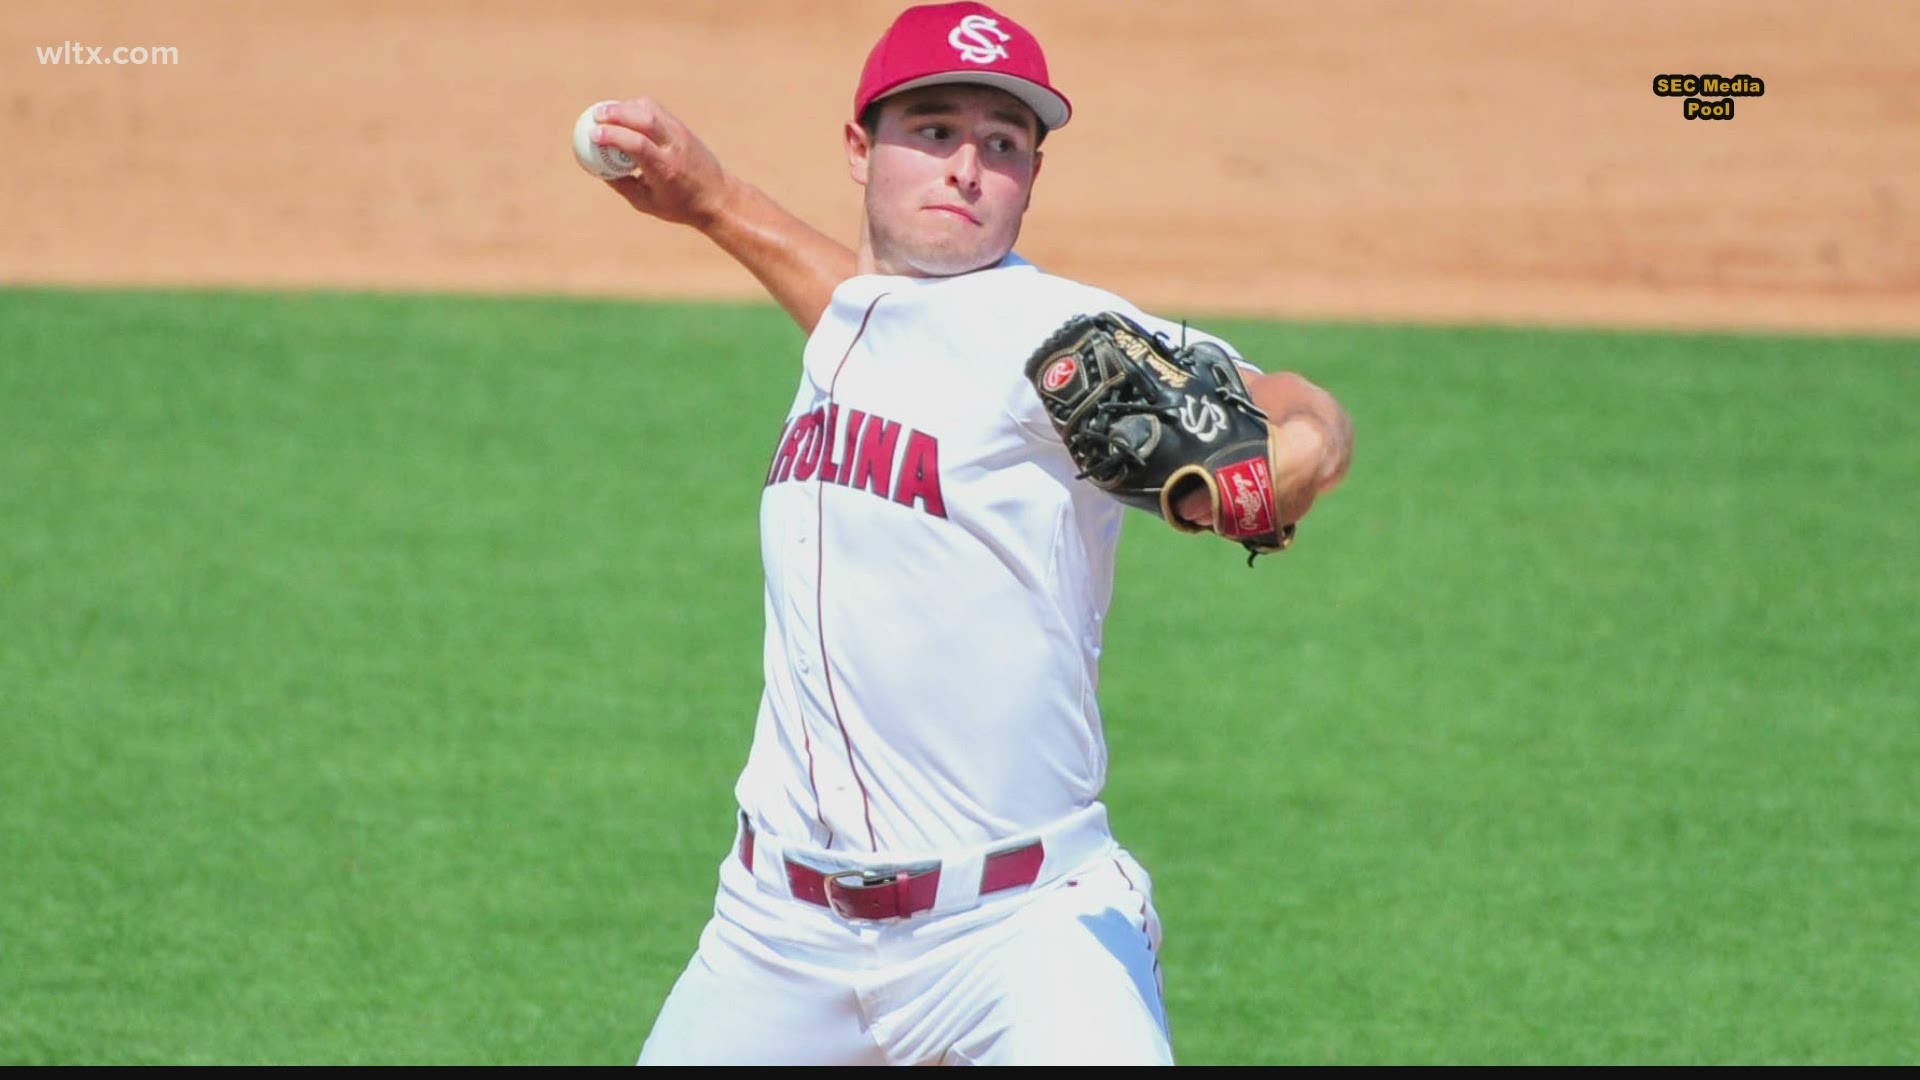 South Carolina head coach Mark Kingston talks about what pitcher Brett Kerry brings to the table. Kerry will get the start in the regional opener against UVA.